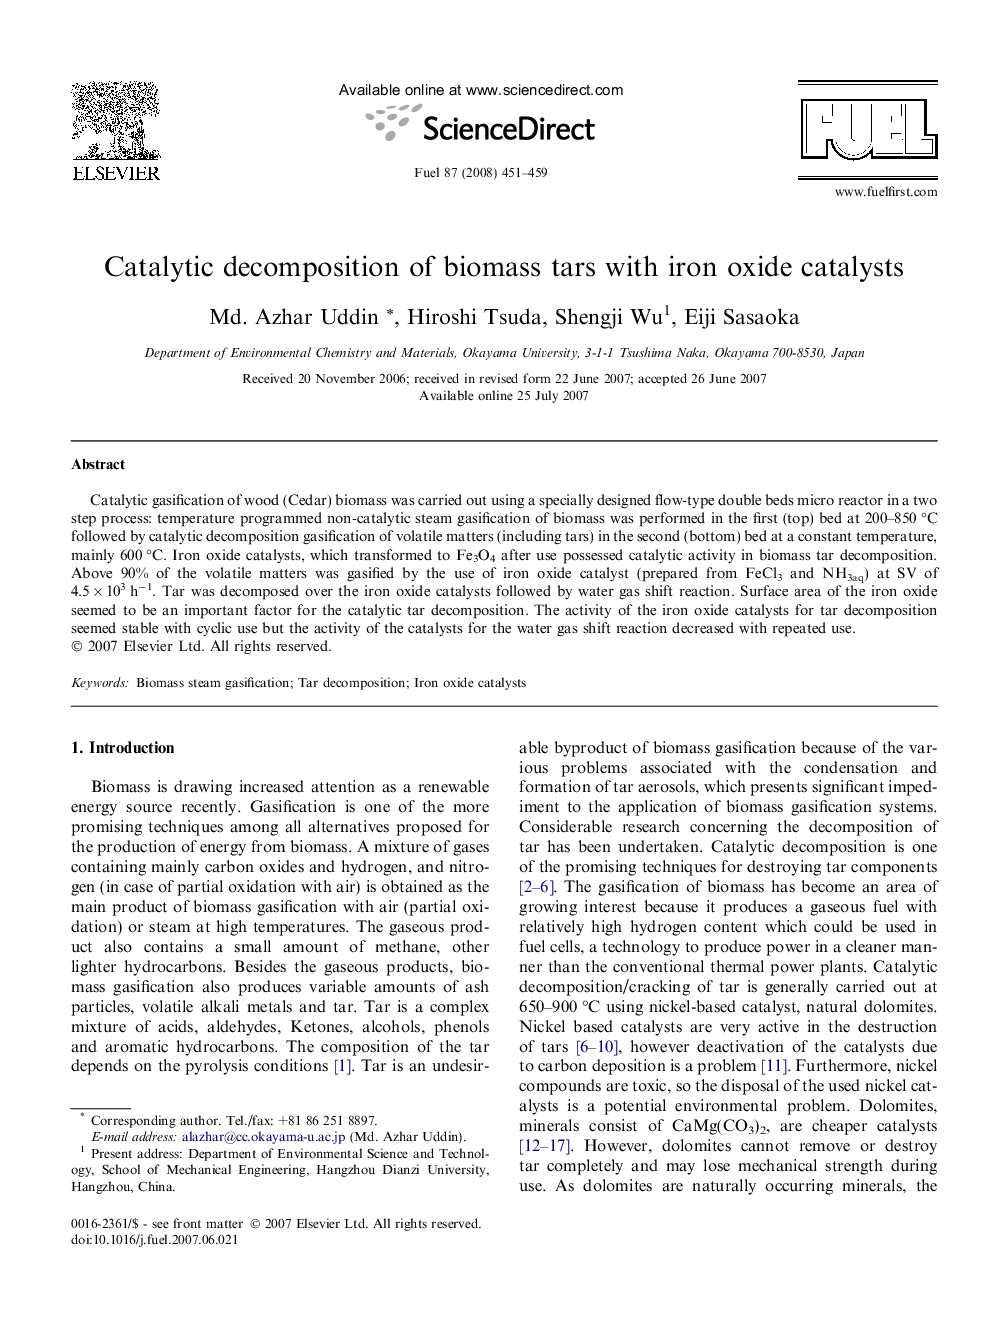 Catalytic decomposition of biomass tars with iron oxide catalysts